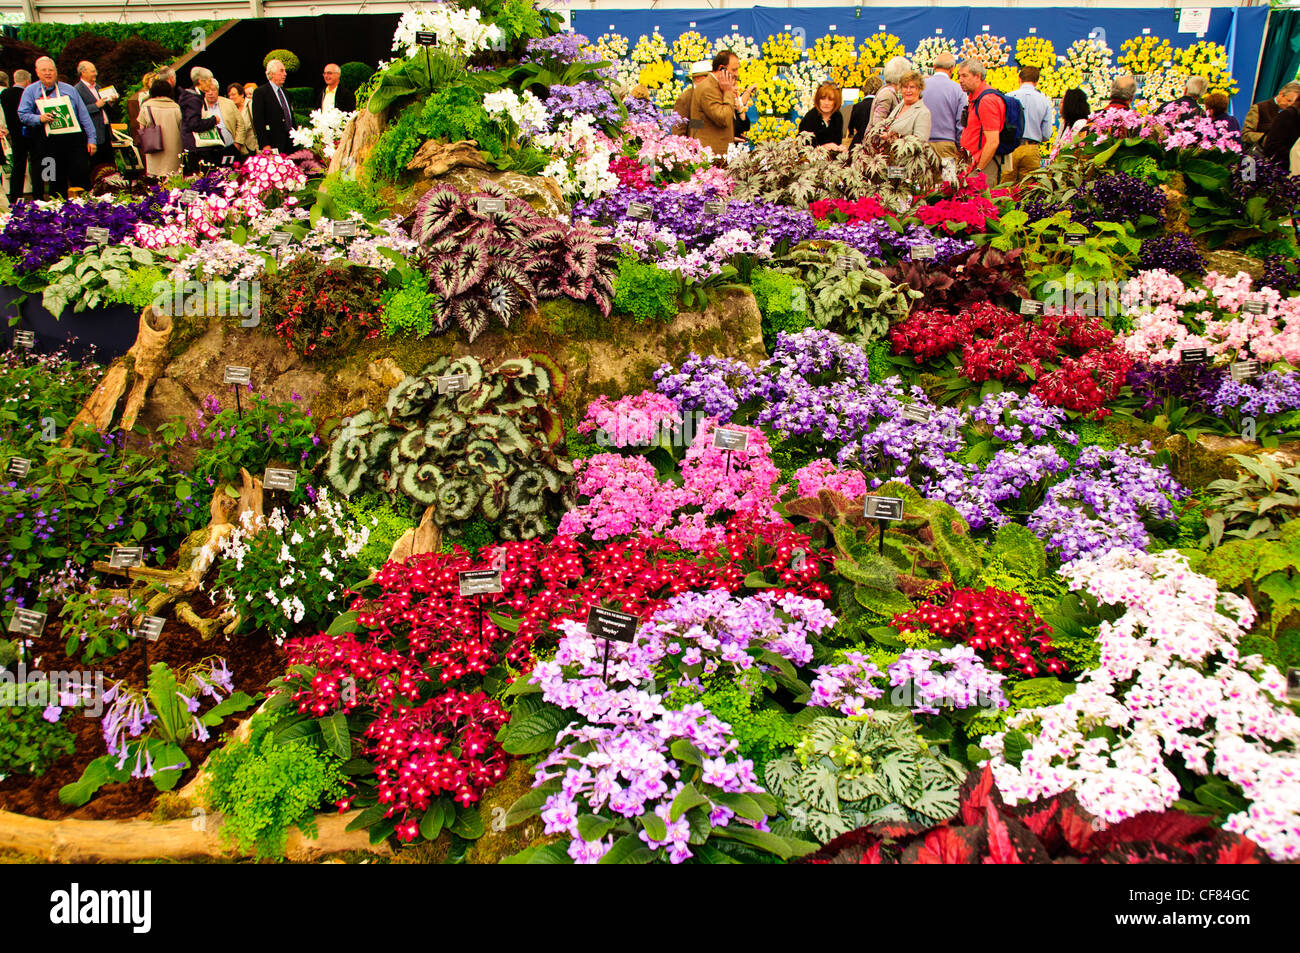 Dibleys Nursery,Streptocarpus Specialists,The RHS Chelsea Flower Show,formally known as the Great Spring Show,A Five Day Event. Stock Photo